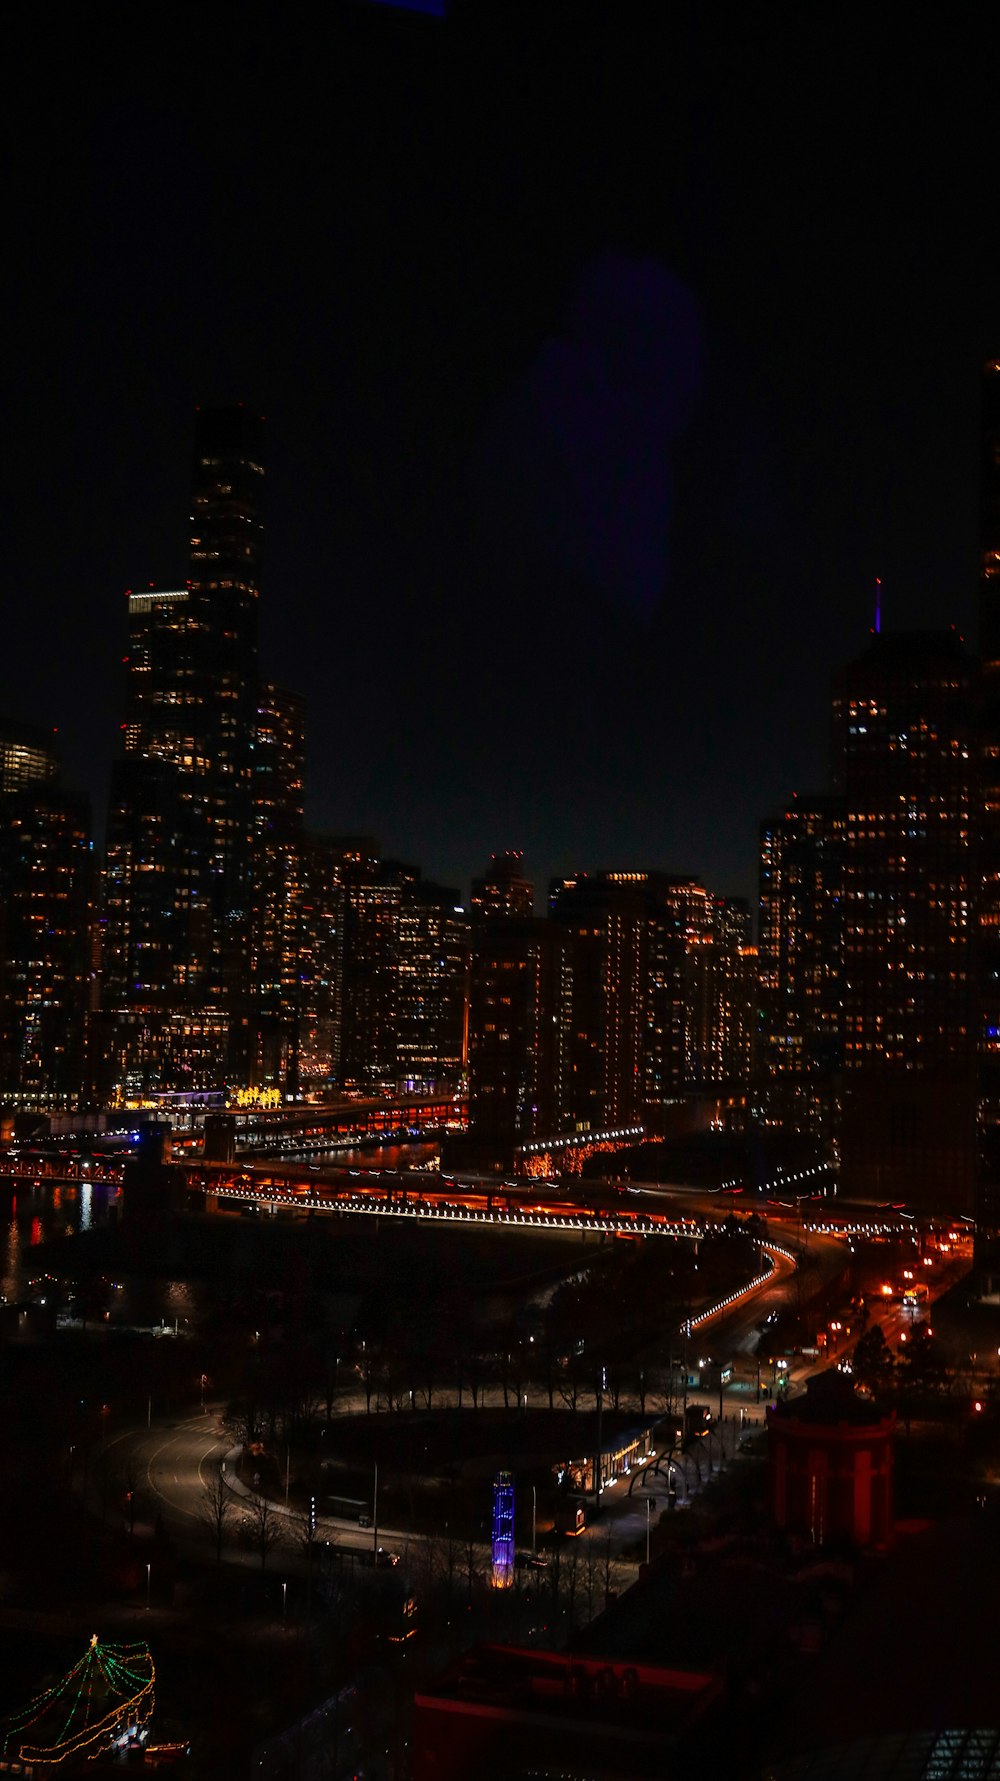 a night view of a city with lots of tall buildings